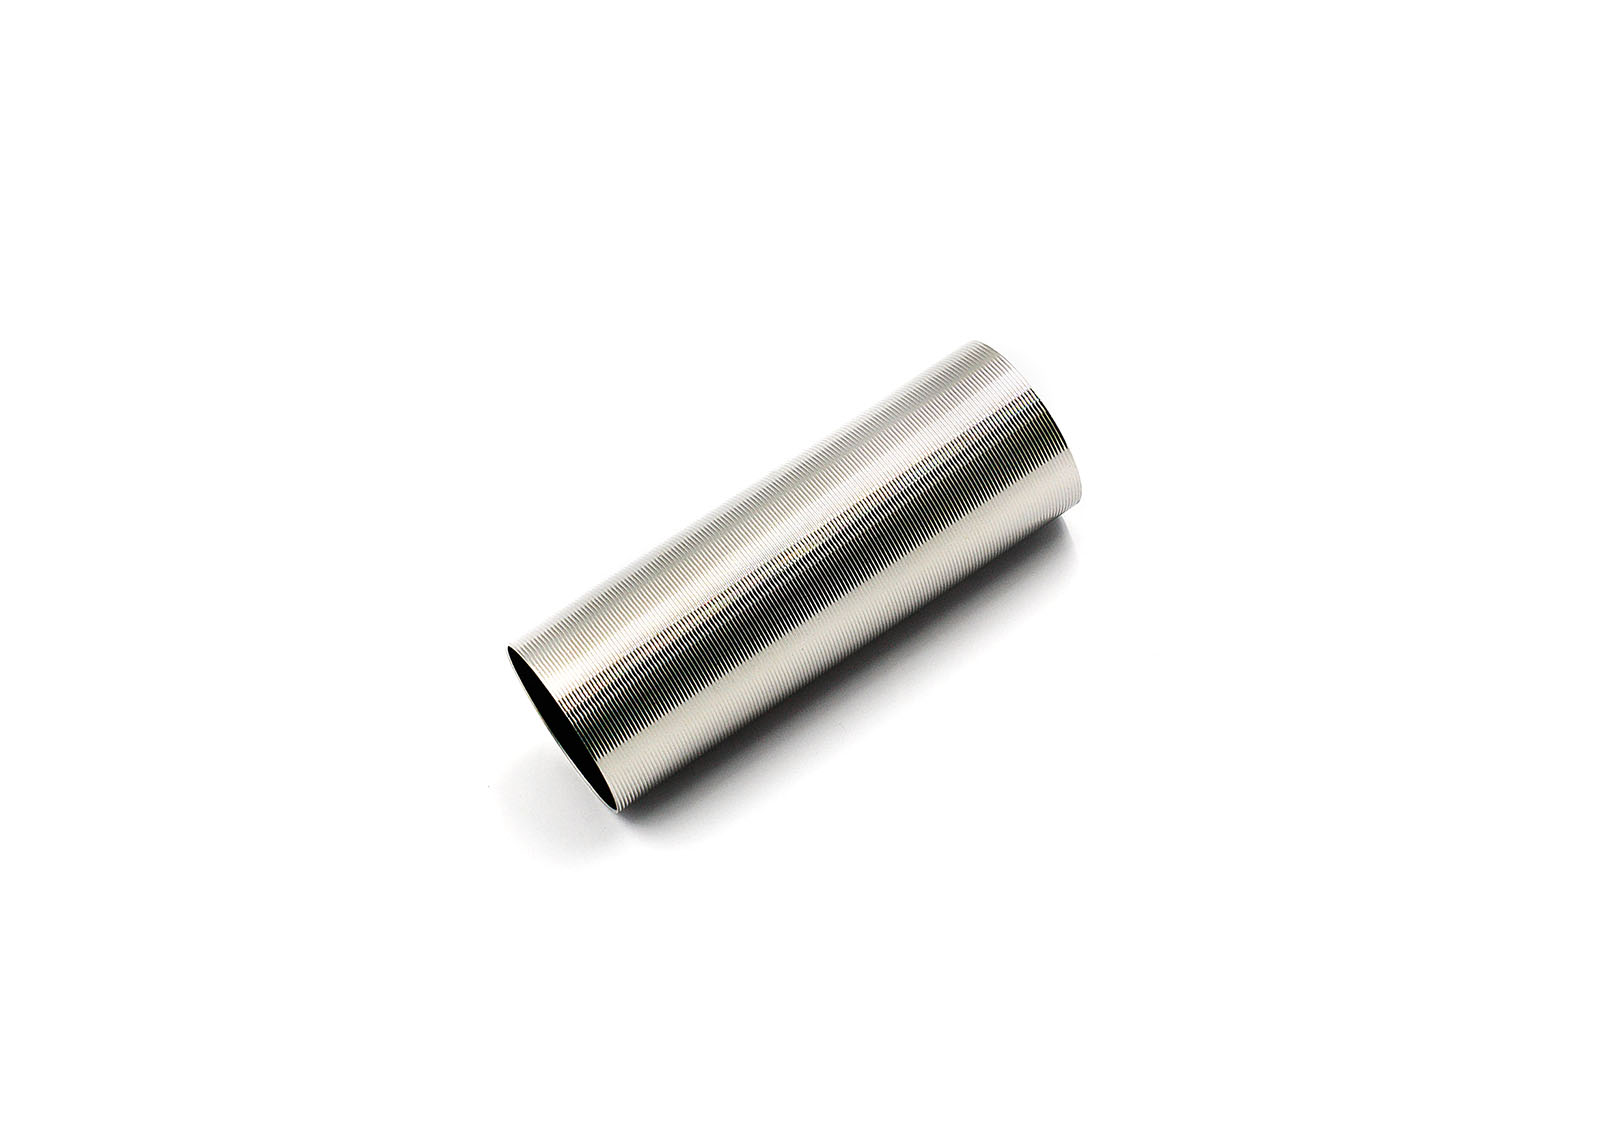 Bore-Up Cylinder Type 0 for M16-A1/A2/VN, AUG, AK47, G3 - Modify Airsoft parts